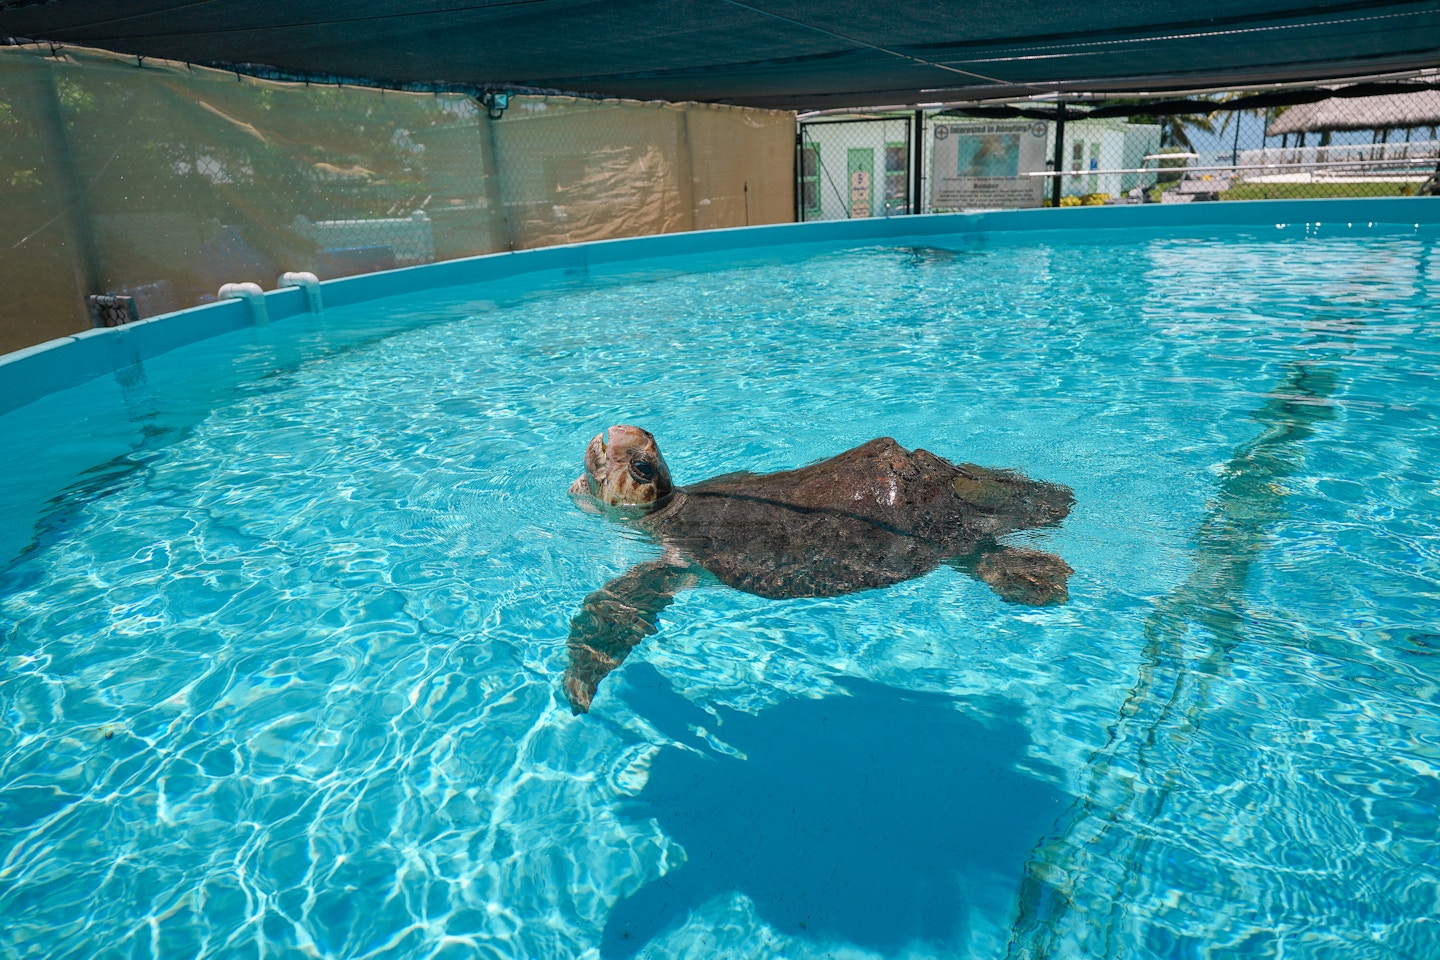 The Marathon Turtle Hospital is a great place to visit in Marathon in the Florida Keys to learn about rescue efforts and conservation. You also get to see cute turtles up close and personal!